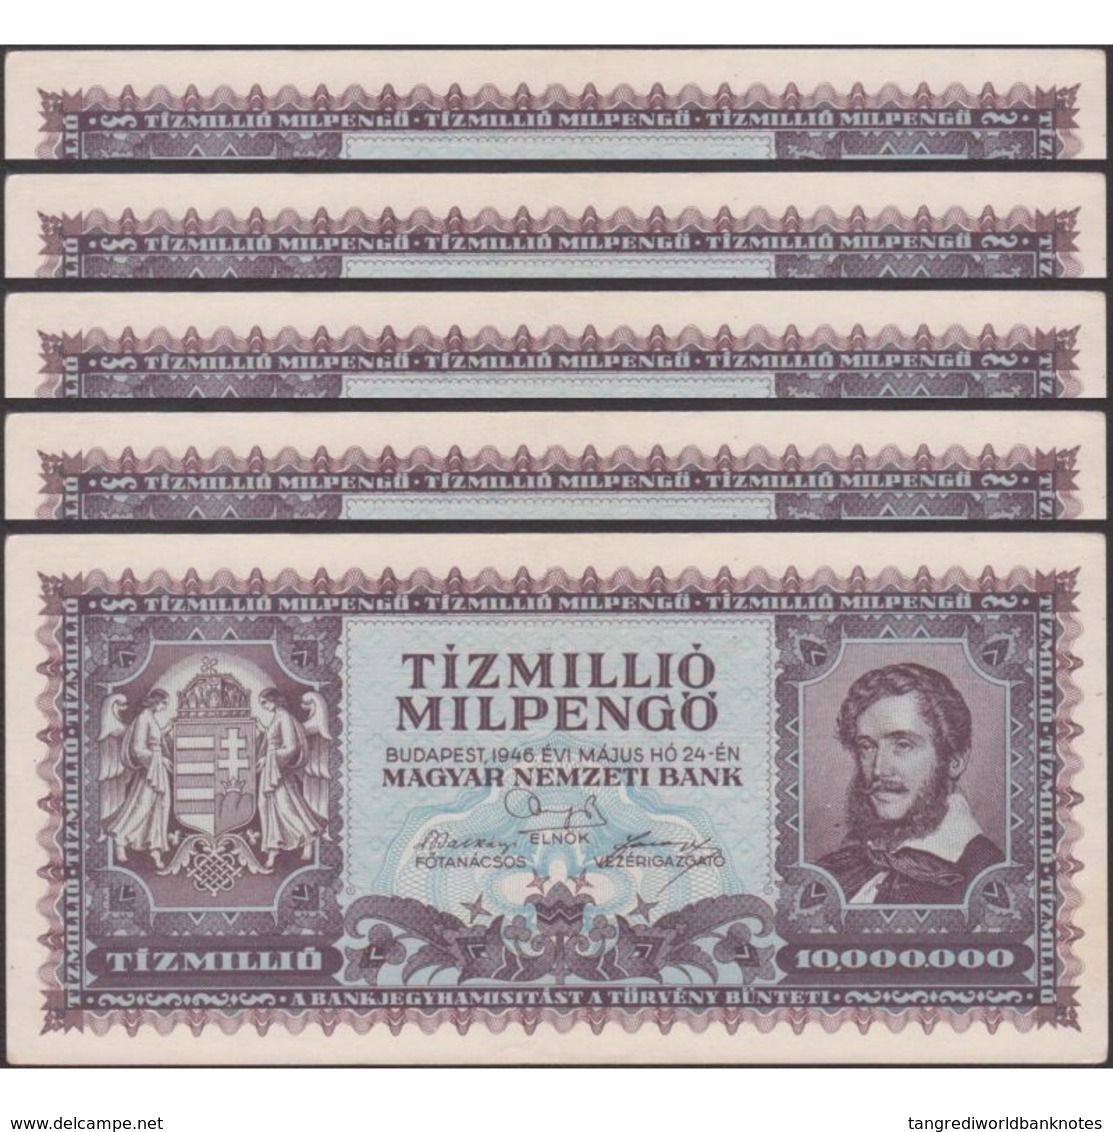 TWN - HUNGARY 129 - 10000000 10.000.000 Milpengo 24.5.1946 DEALERS LOT X 5 - No Serial F/VF - Hungary